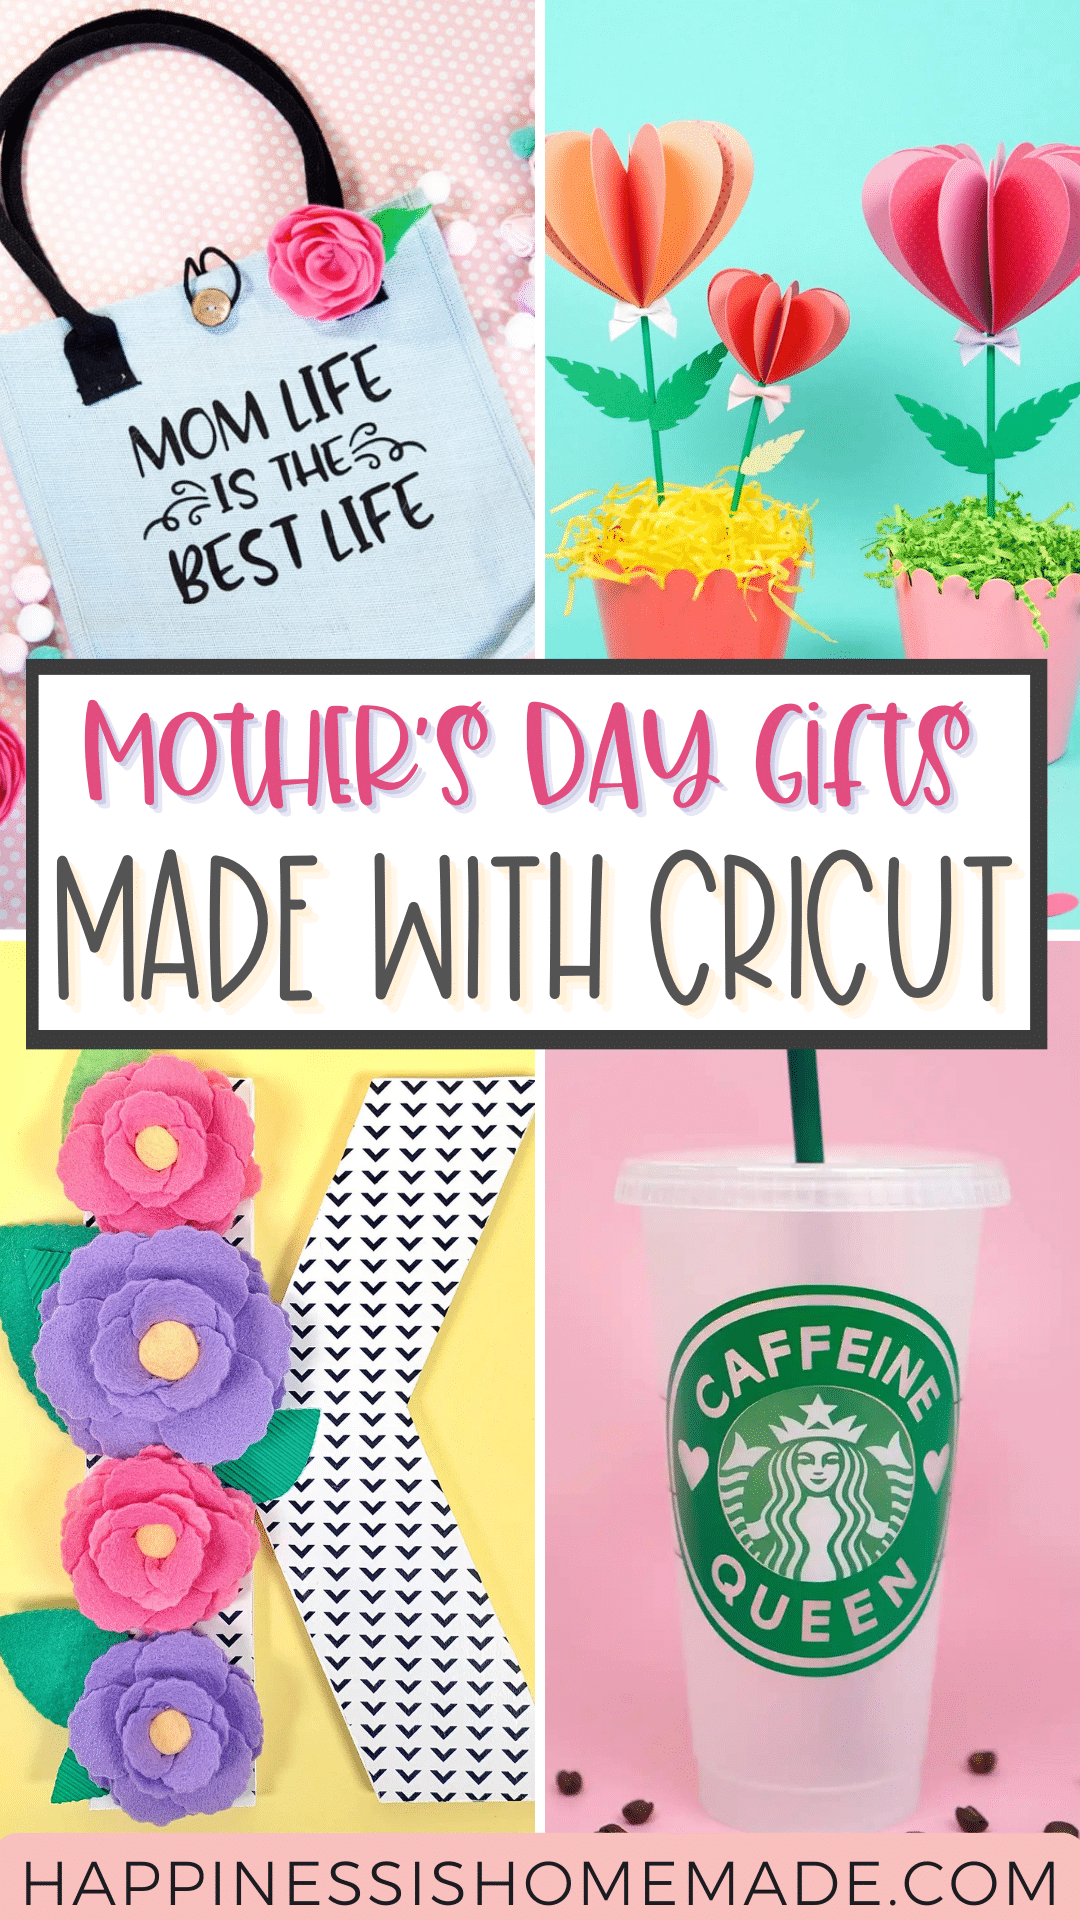 Pin on Mother's Day Ideas